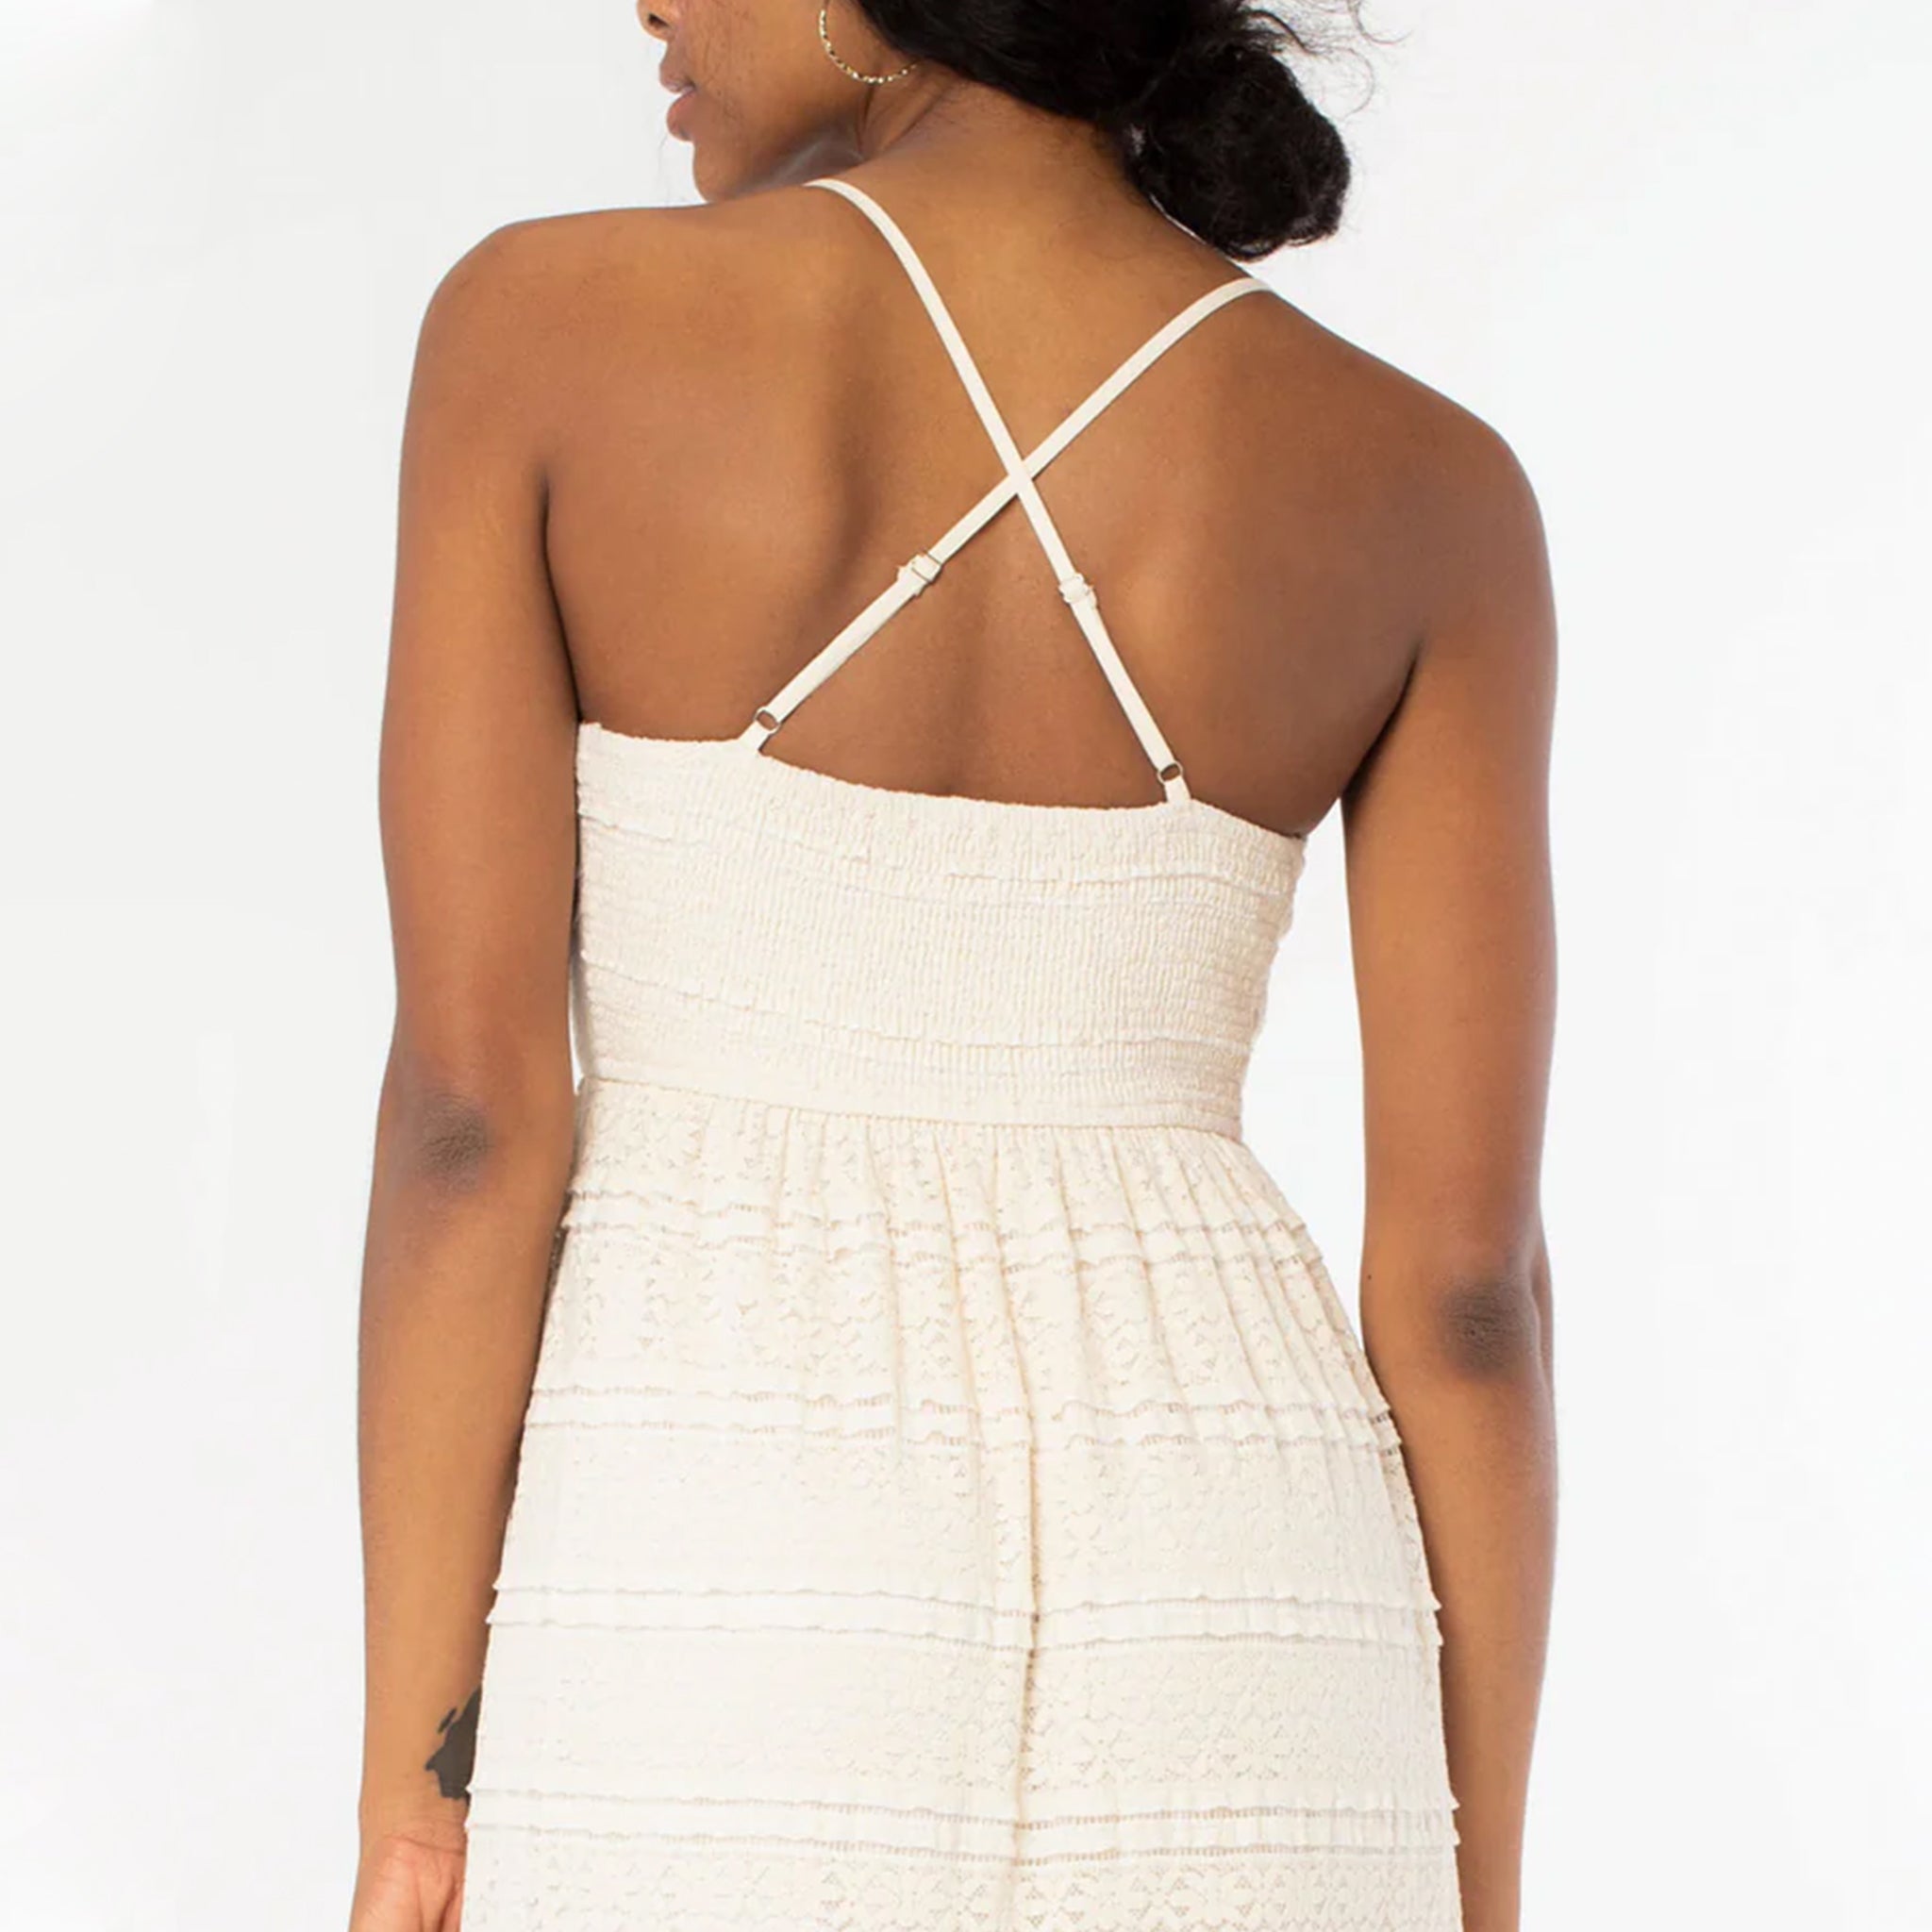 On a white background is a natural colored lace dress with spaghetti straps and a cross cross back.